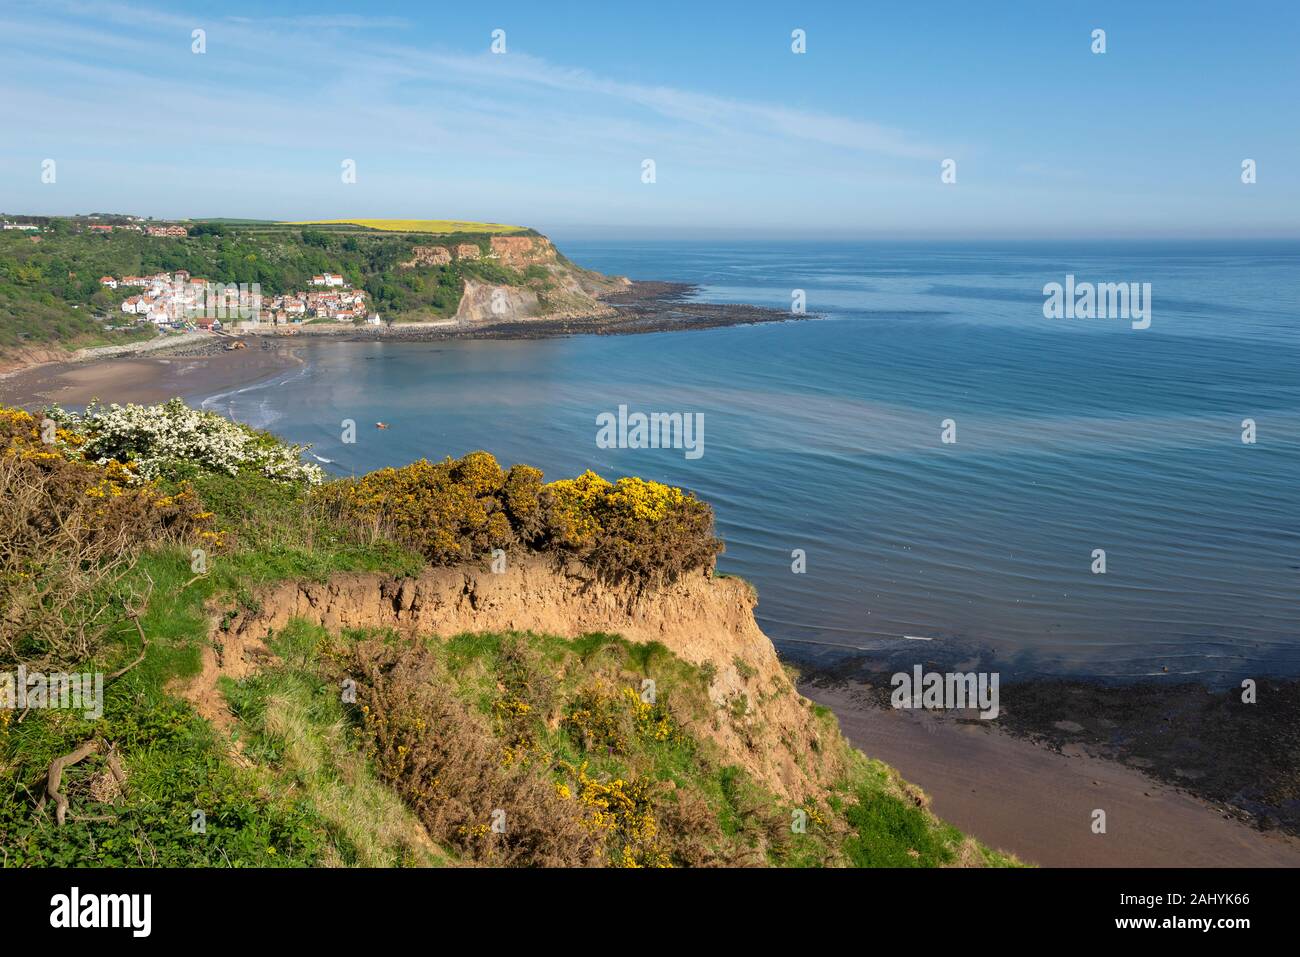 A sunny spring day at Runswick Bay on the coast of East Yorkshire, England. Stock Photo